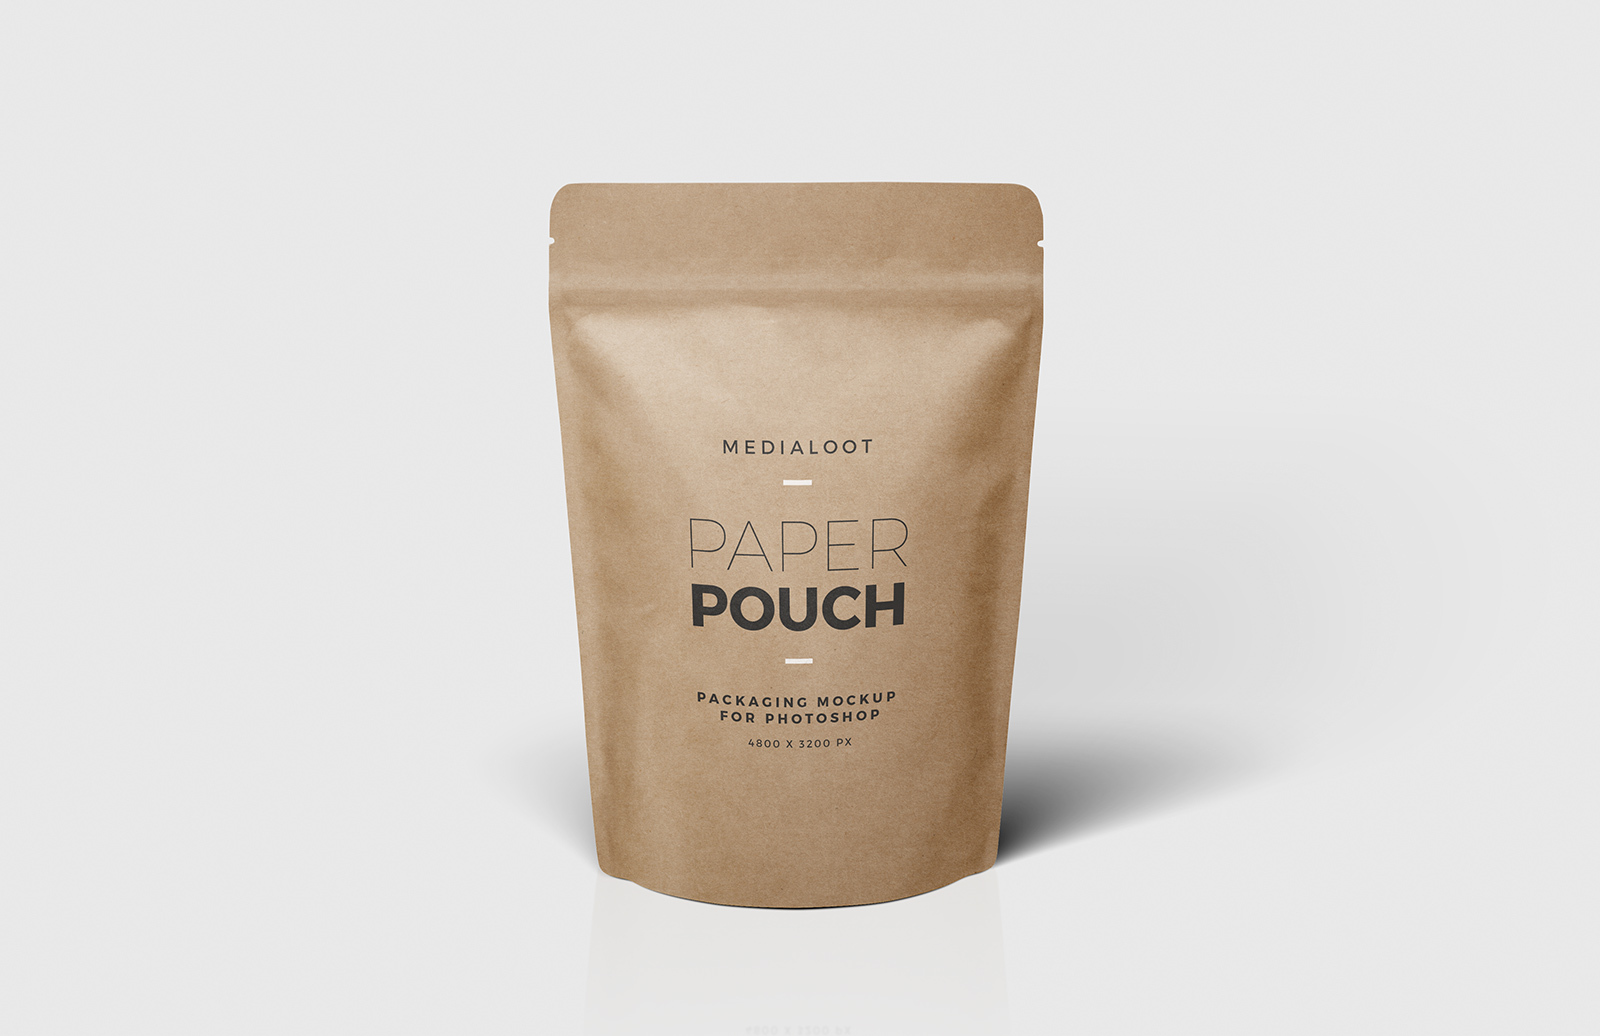 Download Free Paper Pouch Packaging Mockup Medialoot PSD Mockup Templates